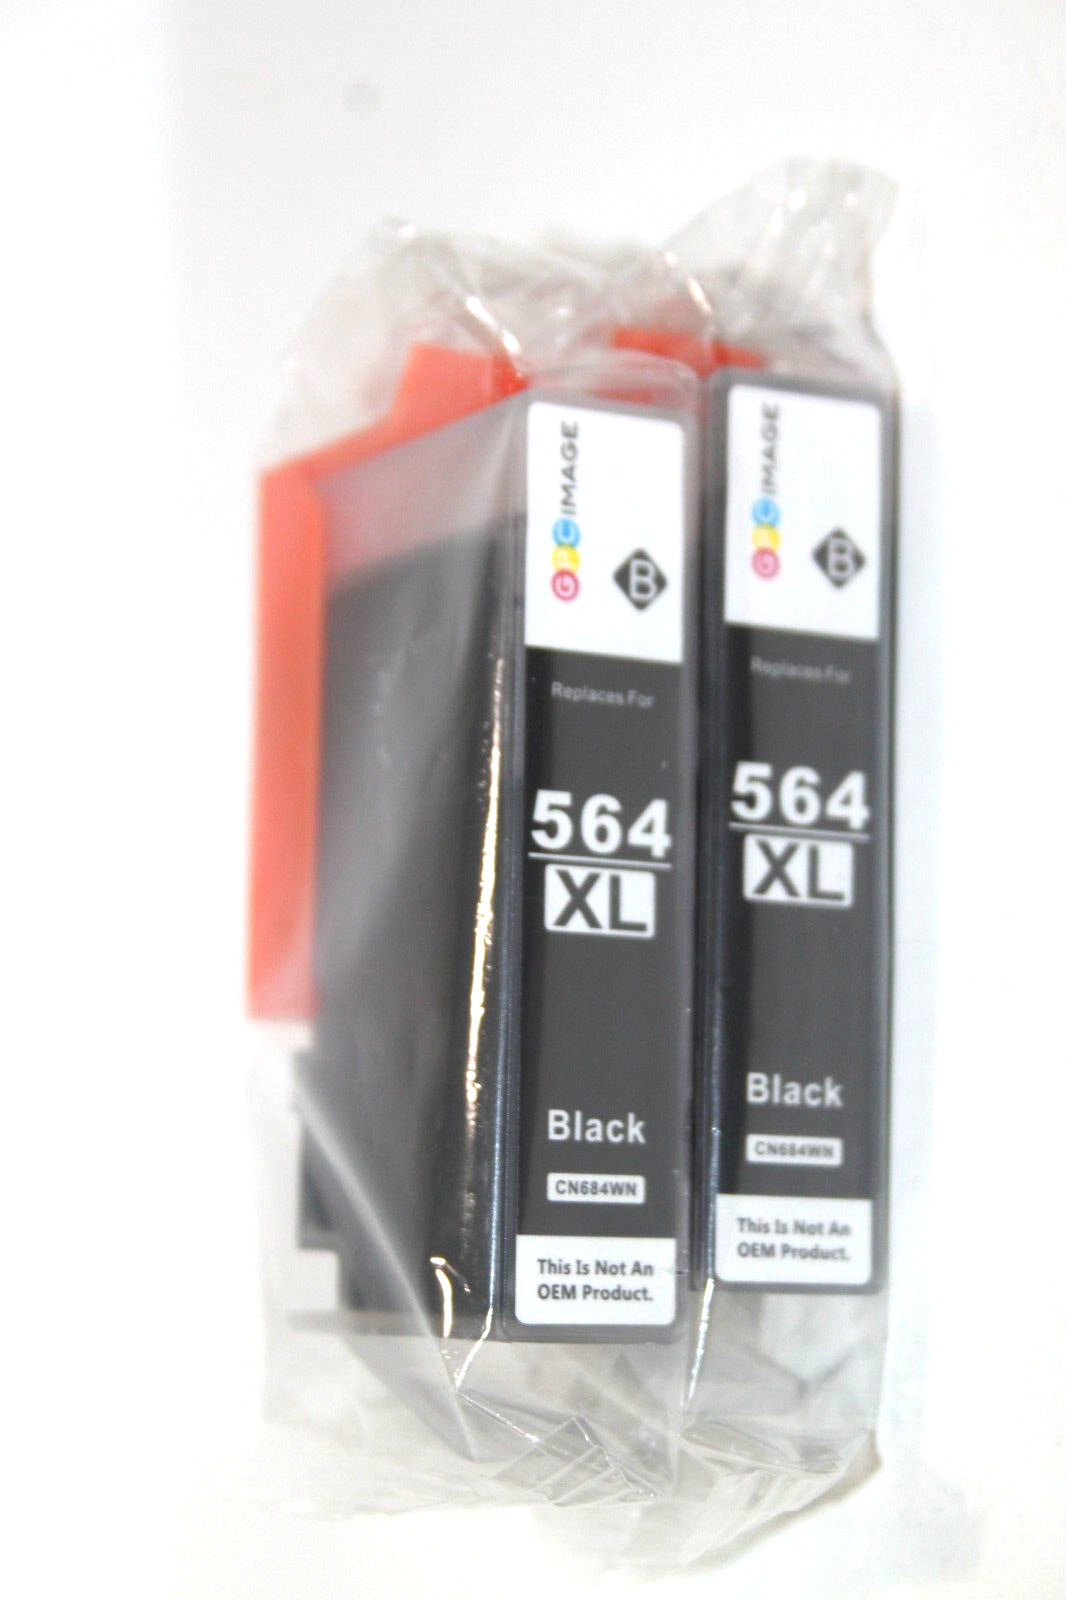 GPC Image 564XL Black Ink Cartridges Lot of 2 Sealed New in Package